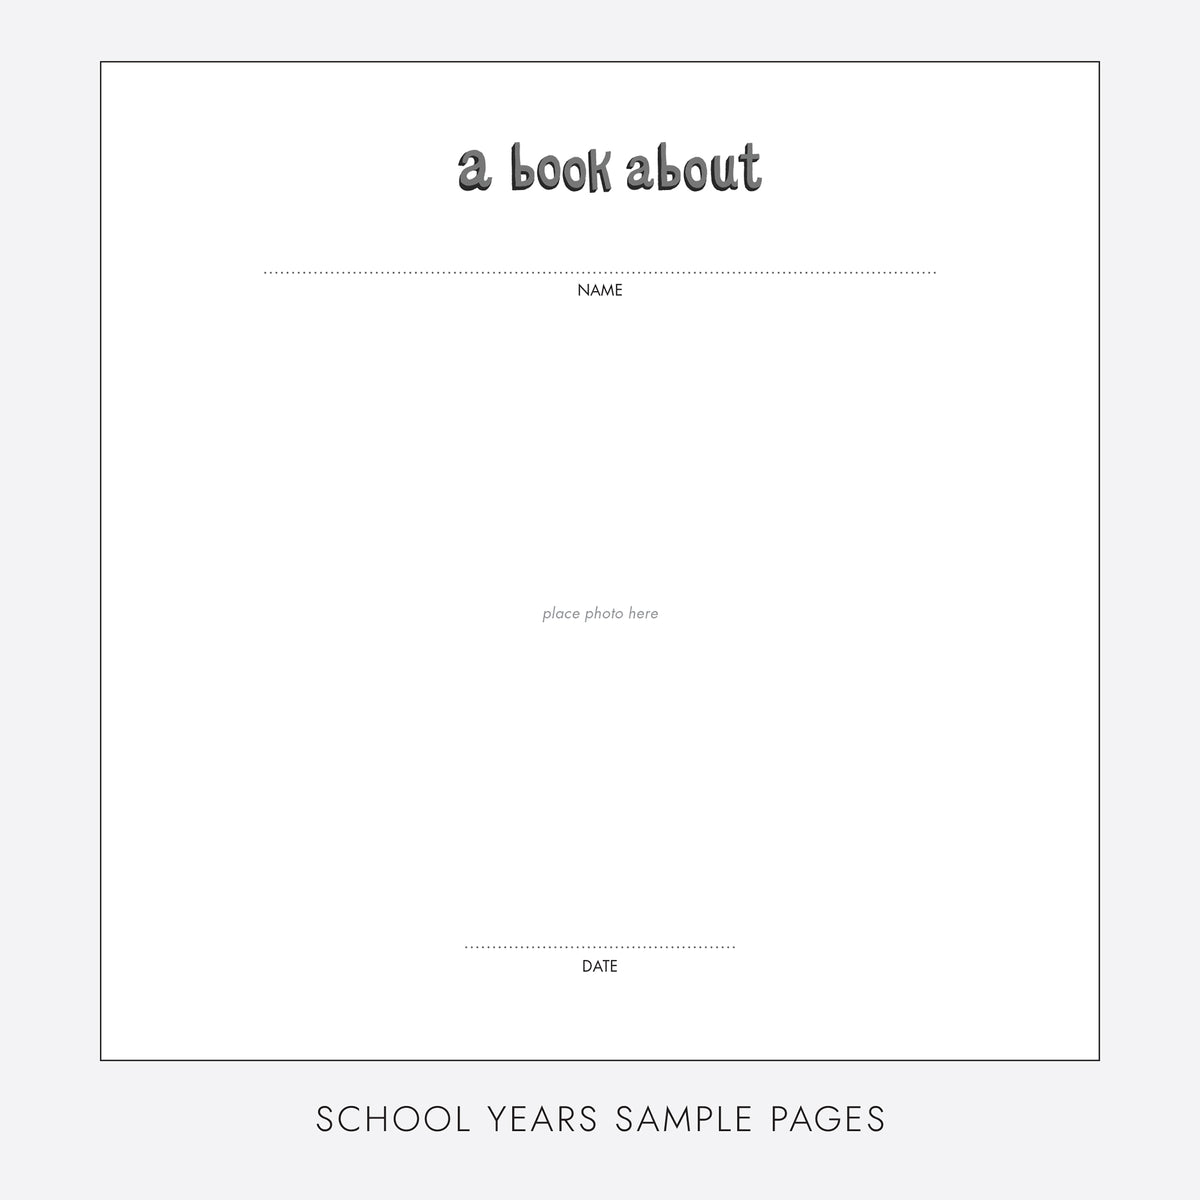 School Years Album | Printed Cover: School Supplies | Available Personalized